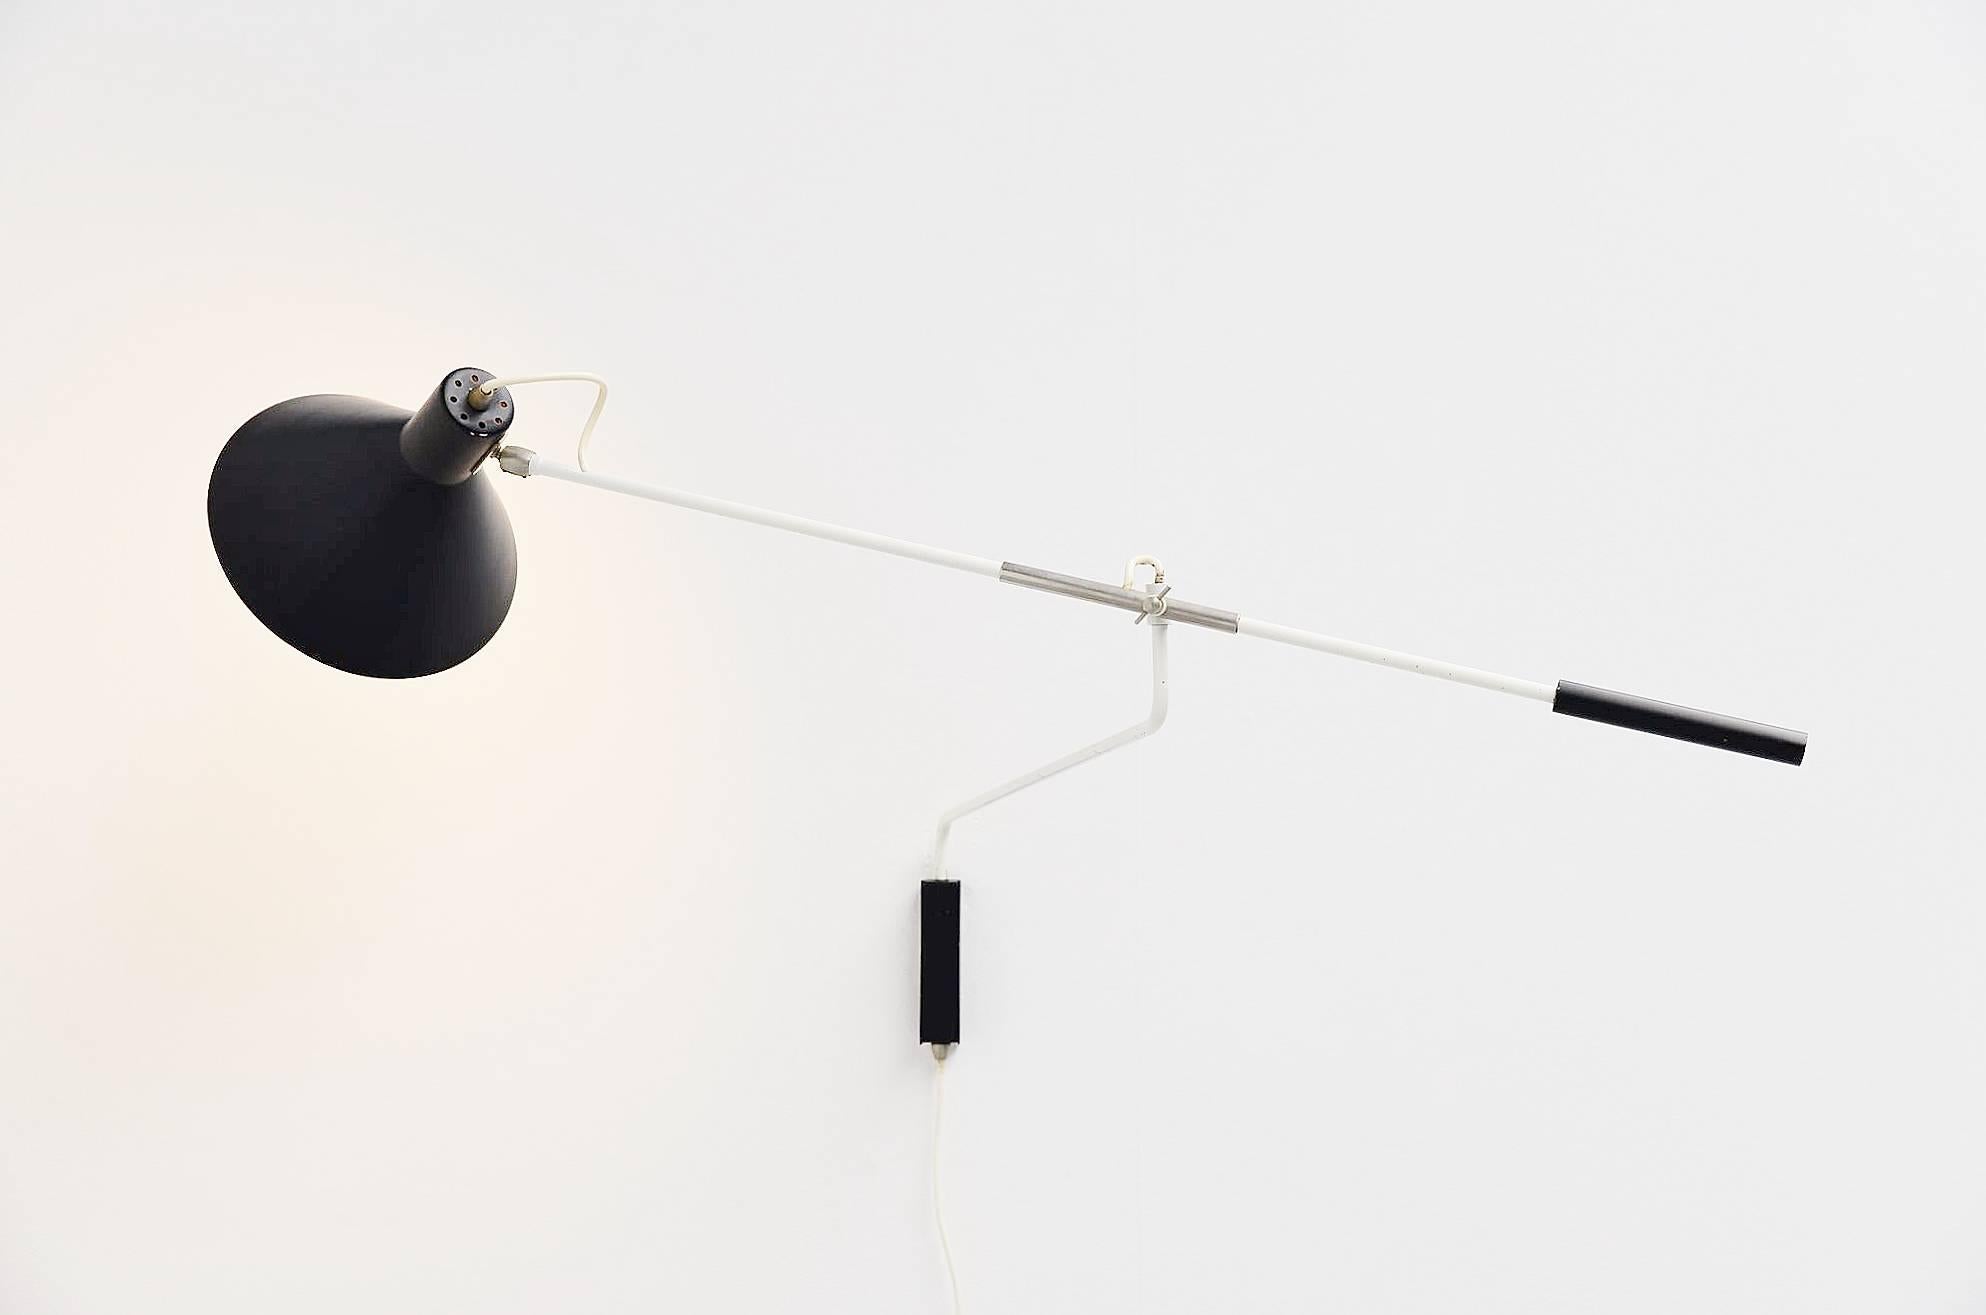 Nice and impressive sculptural counter balance wall lamp designed by J. J. M. Hoogervorst for Anvia Almelo, Holland, 1957. This amazing large wall lamp has an off white lacquered arm and black lacquered shade and weight. The lamp balances and